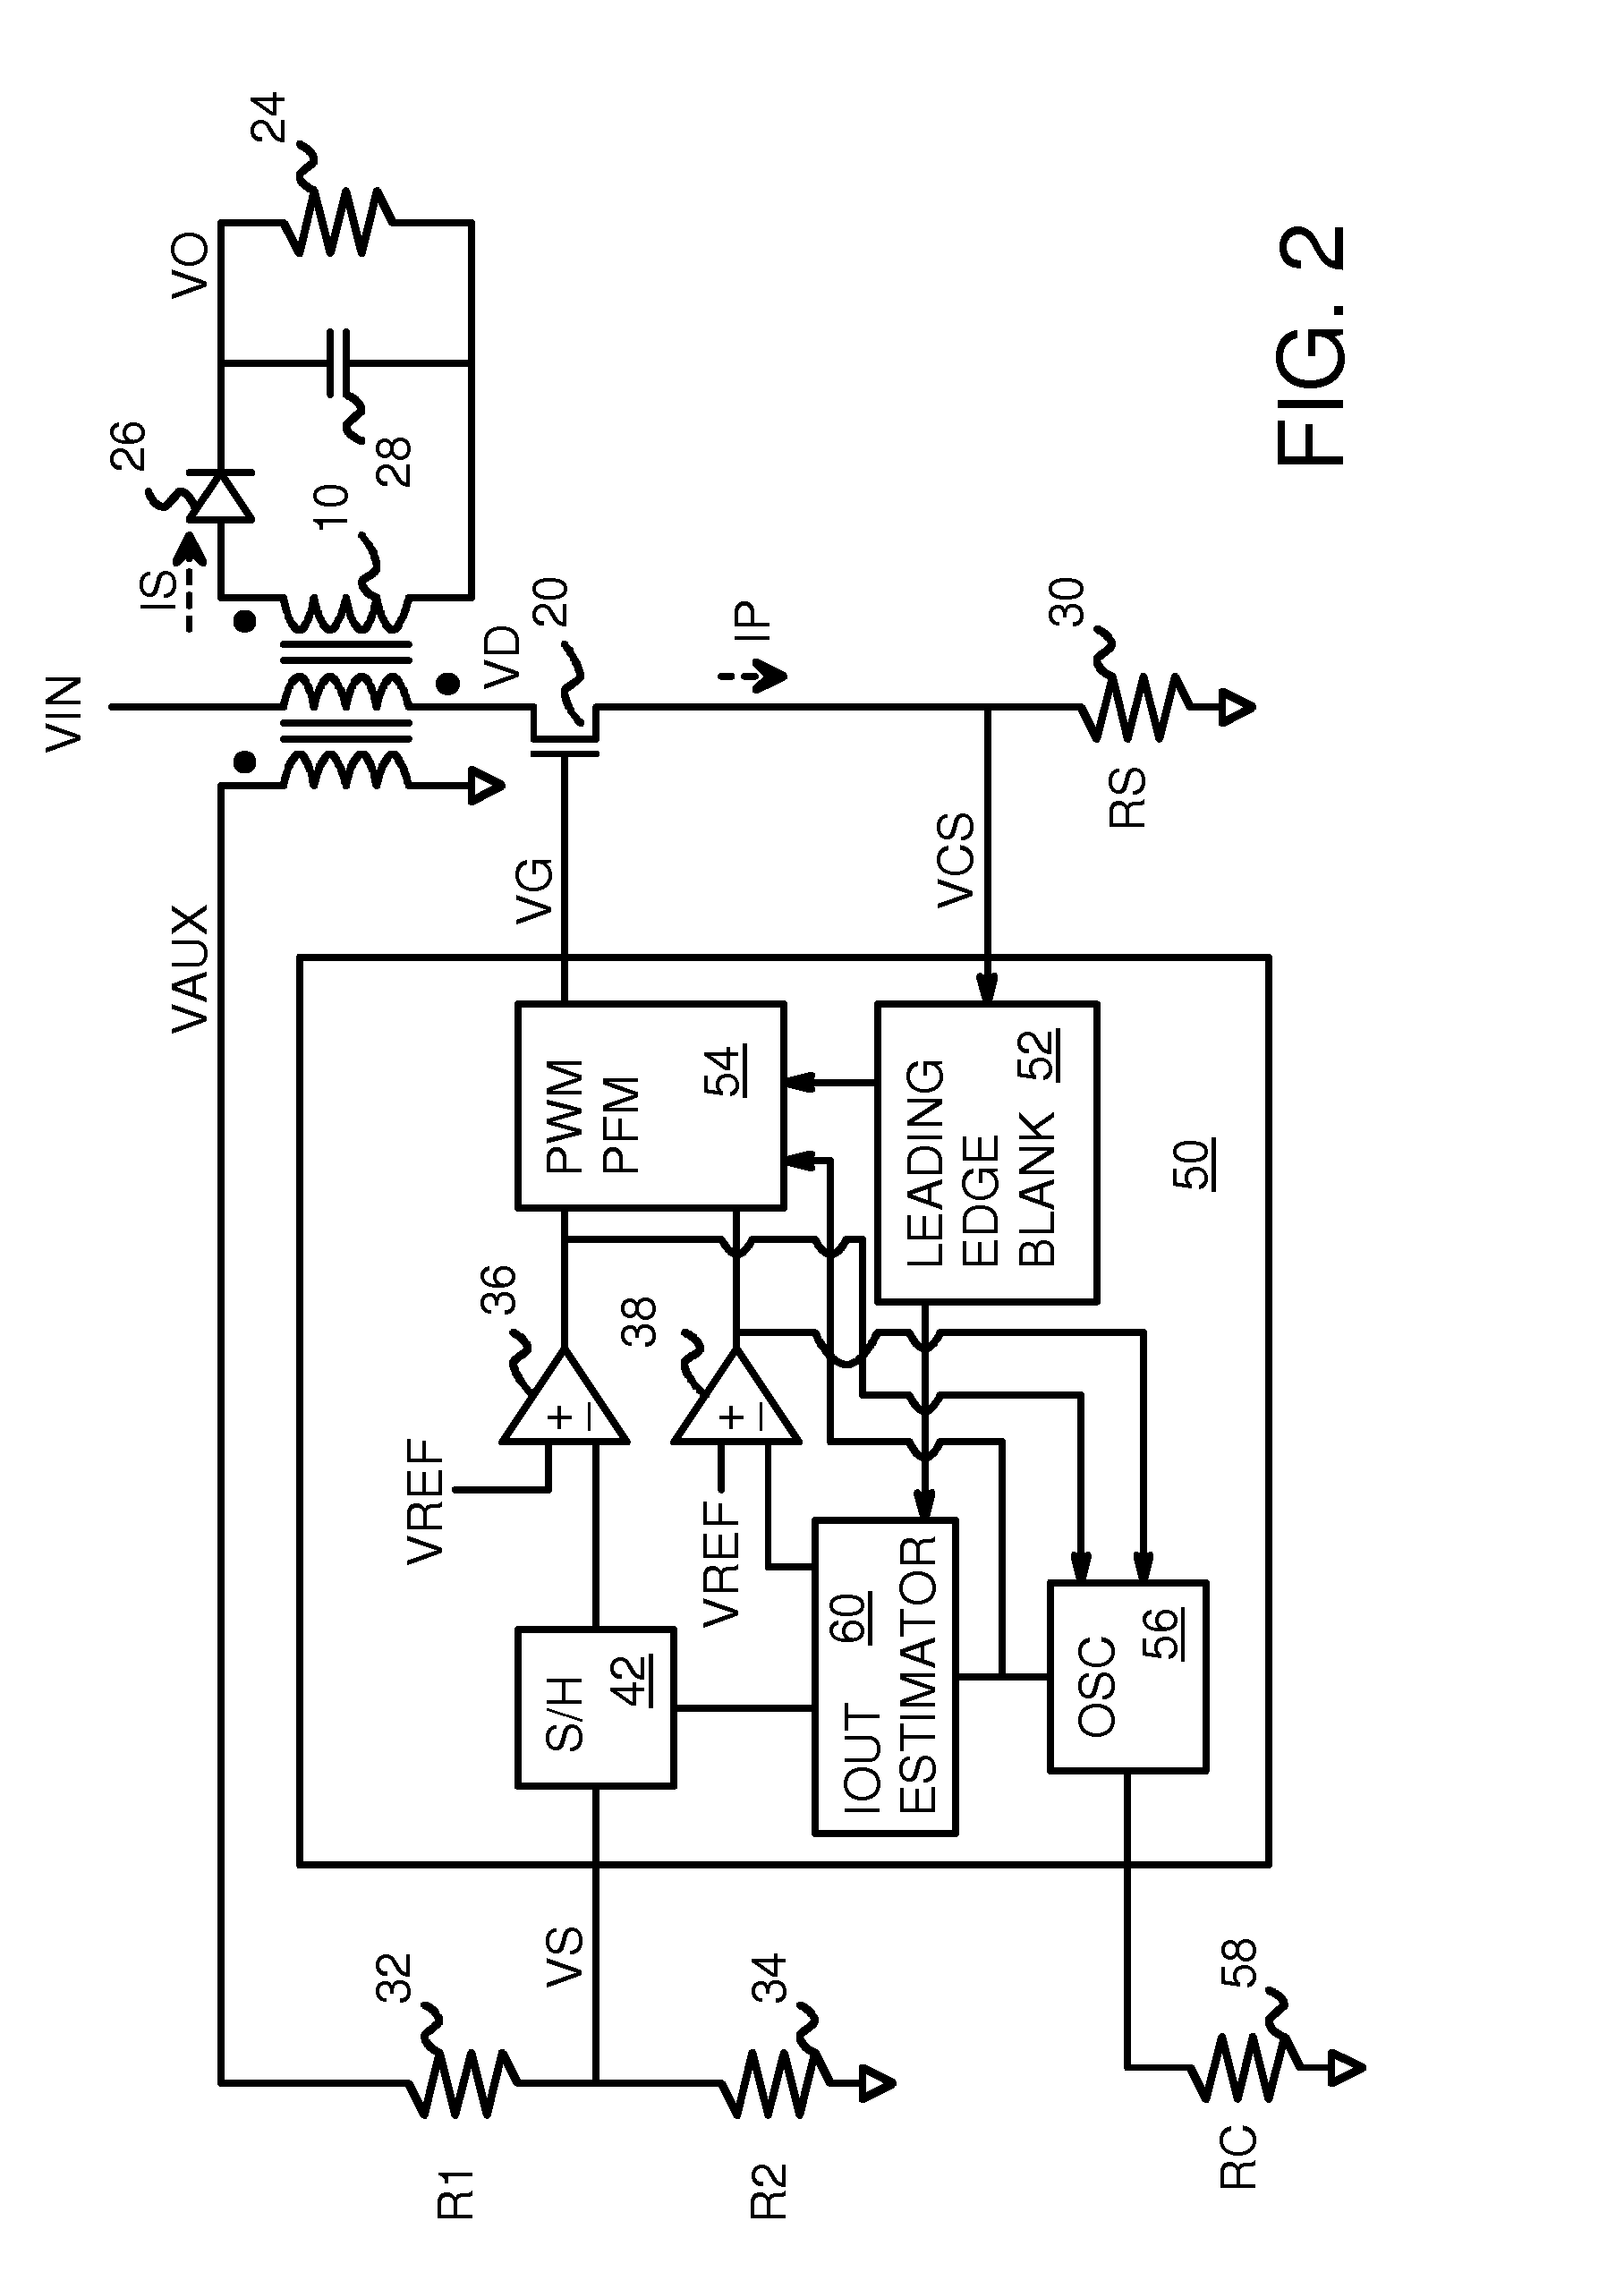 Output Current Estimation for an Isolated Flyback Converter With Variable Switching Frequency Control and Duty Cycle Adjustment for Both PWM and PFM Modes